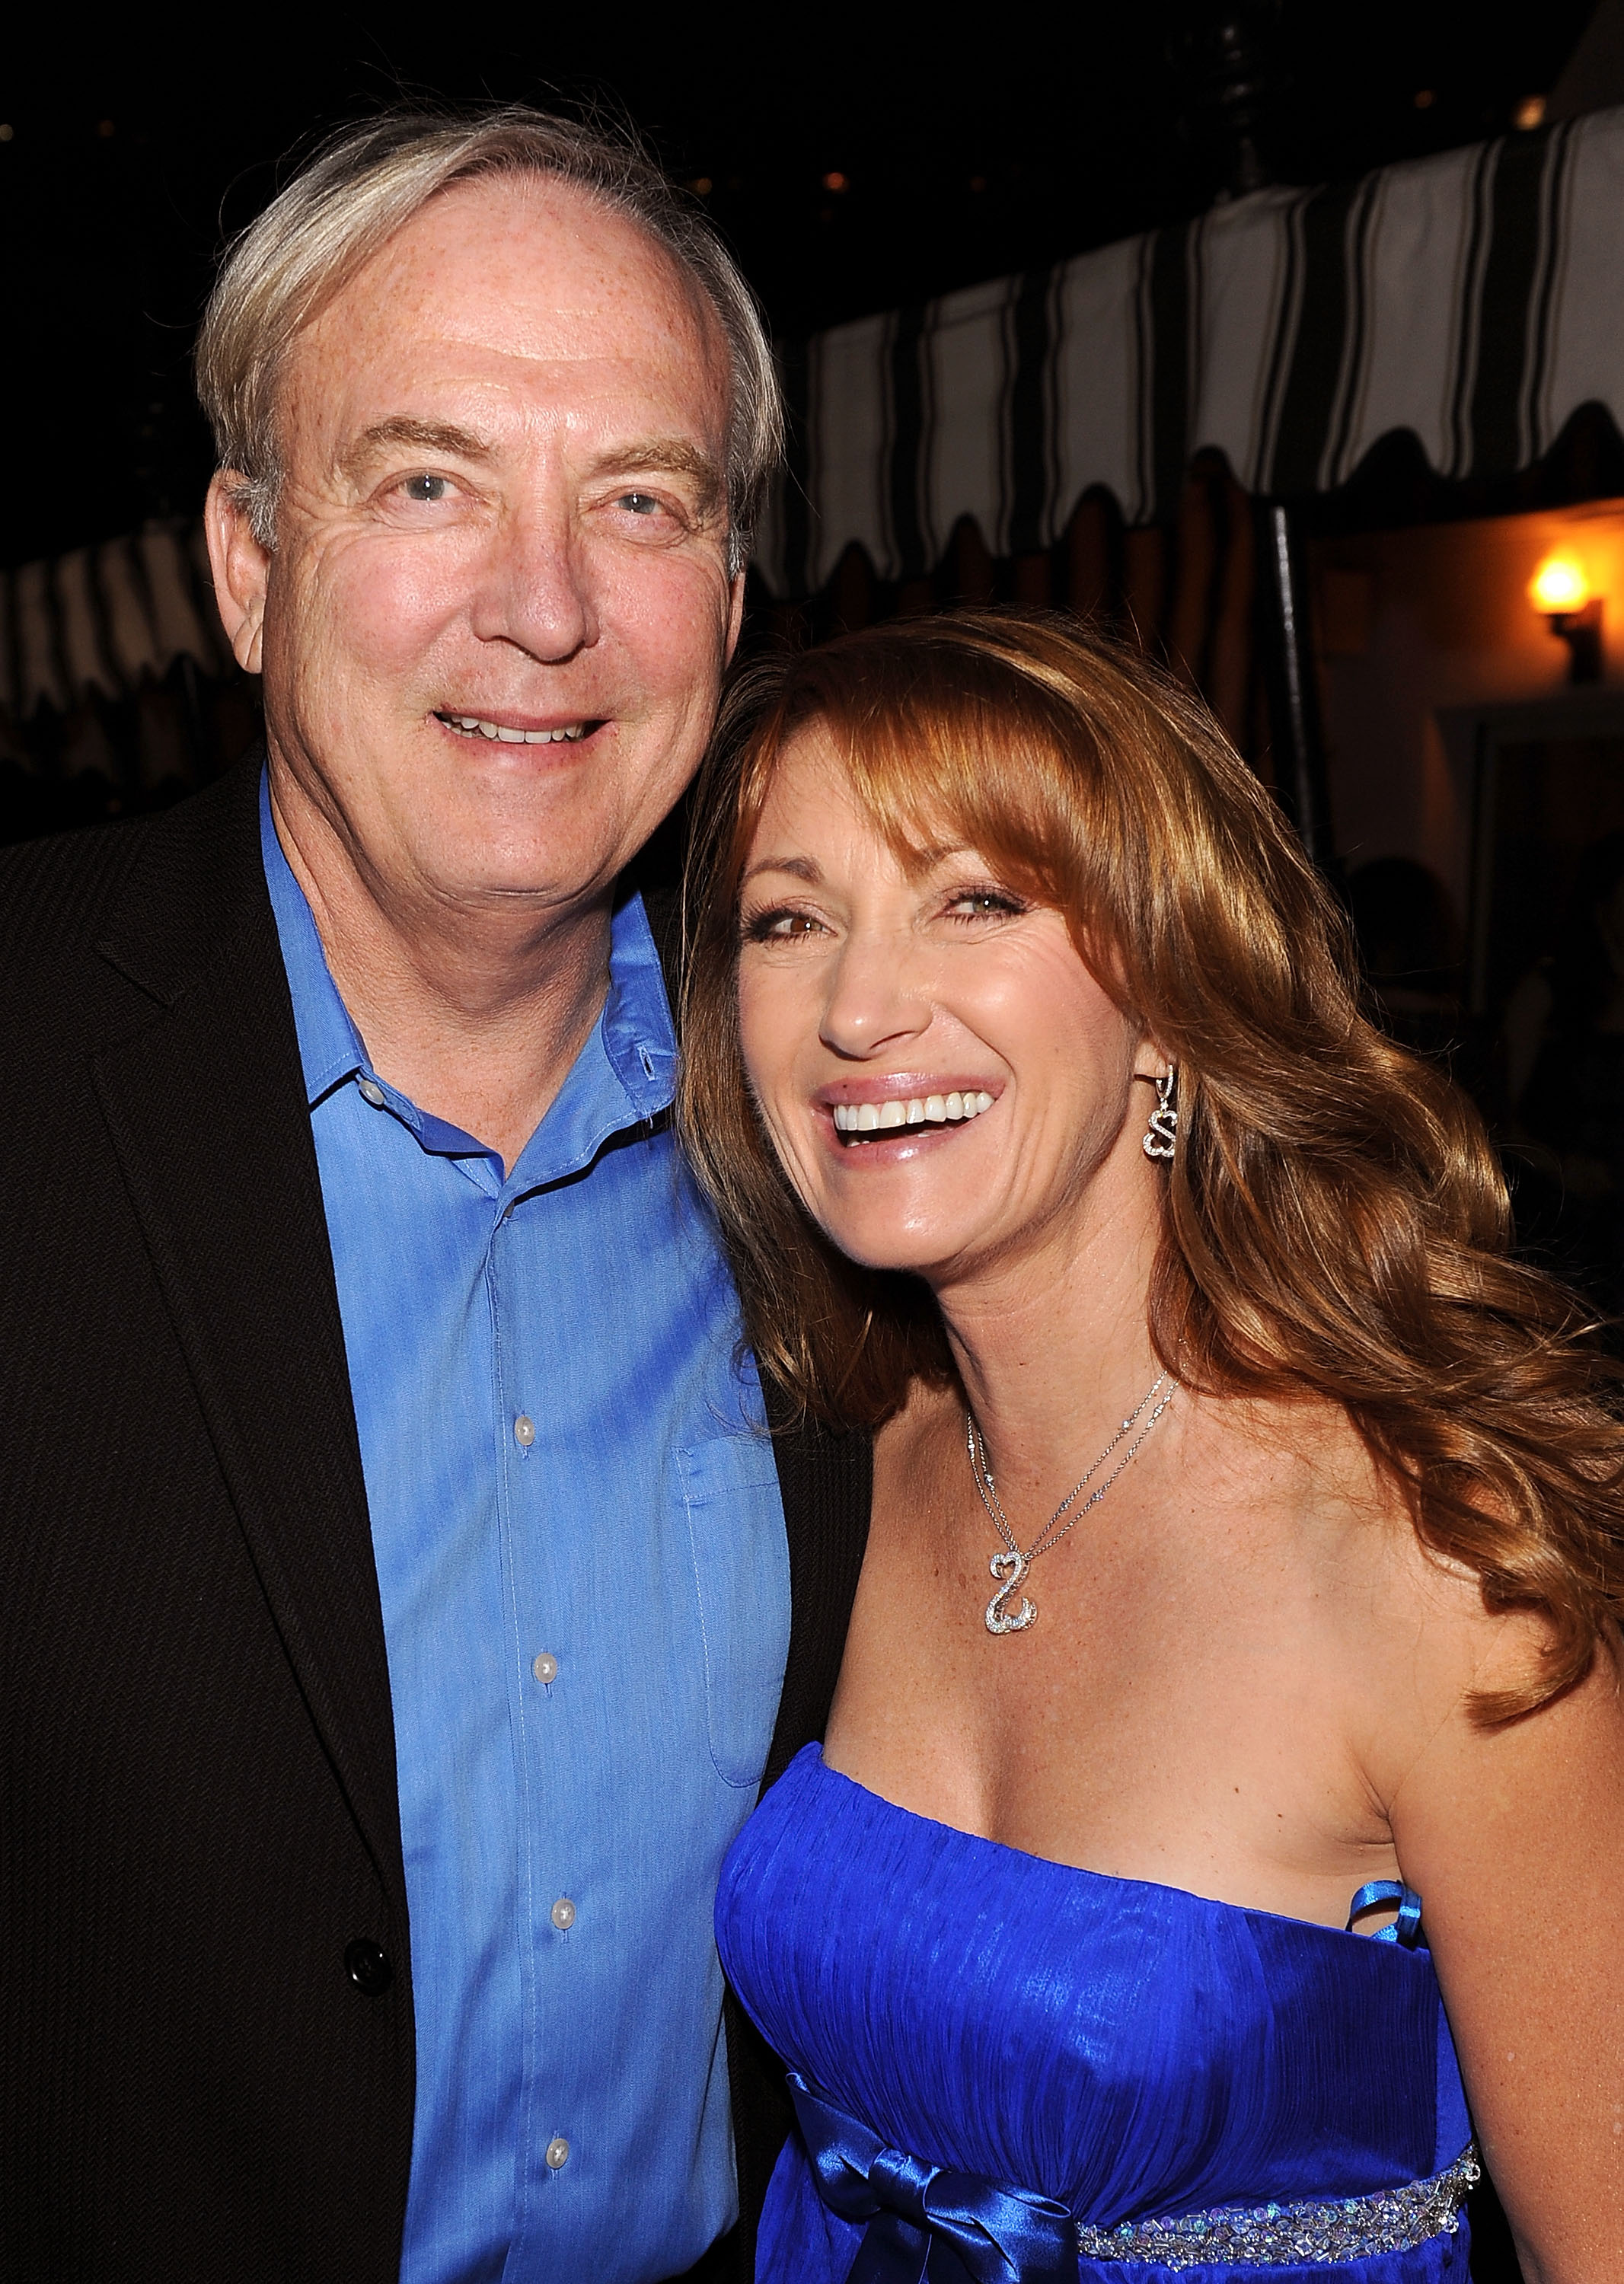 James Keach and Jane Seymour attend the Golden Globes party in Los Angeles, California on January 15, 2010. | Source: Getty Images